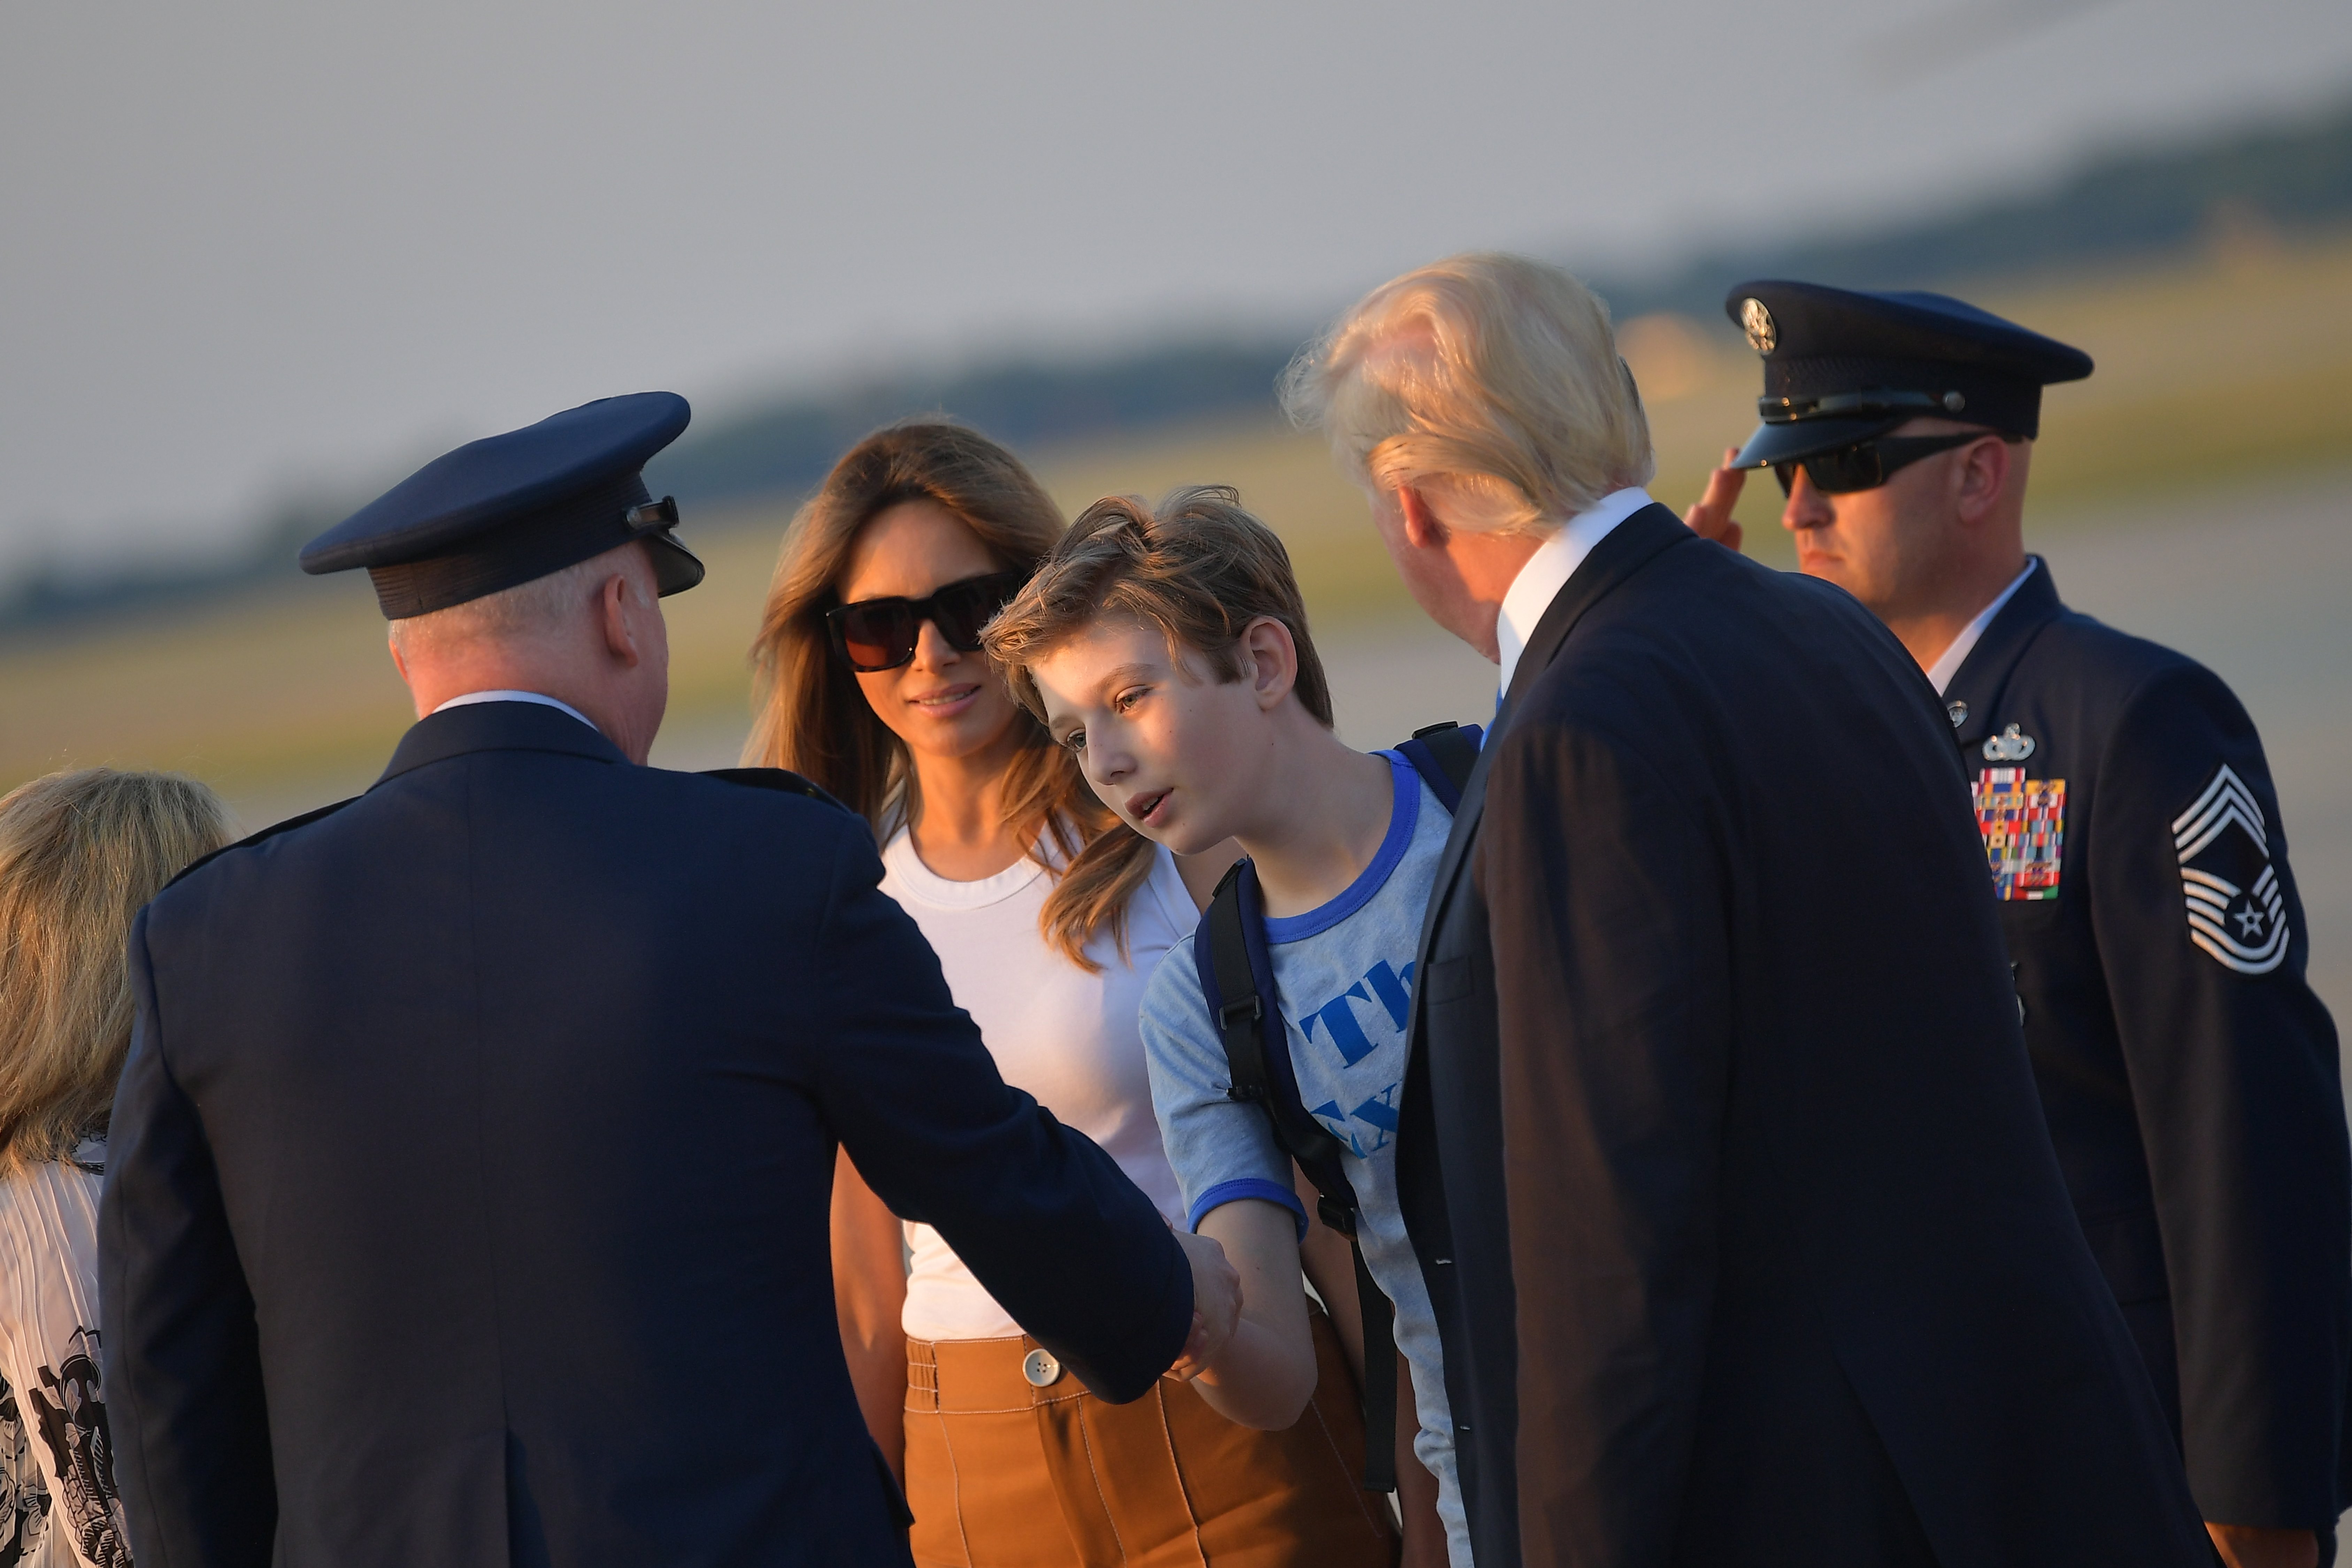 First Lady Melania Trump (2L) and US President Donald Trump (2R) watch as their son Barron Trump shakes hands with Col Al Smith who greeted them upon arrival at Andrews Air Force Base in Maryland on June 11, 2017. Trump is returning to Washington, DC after spending the weekend at this Bedminster, New Jersey golf club. MANDEL NGAN/AFP/Getty Images